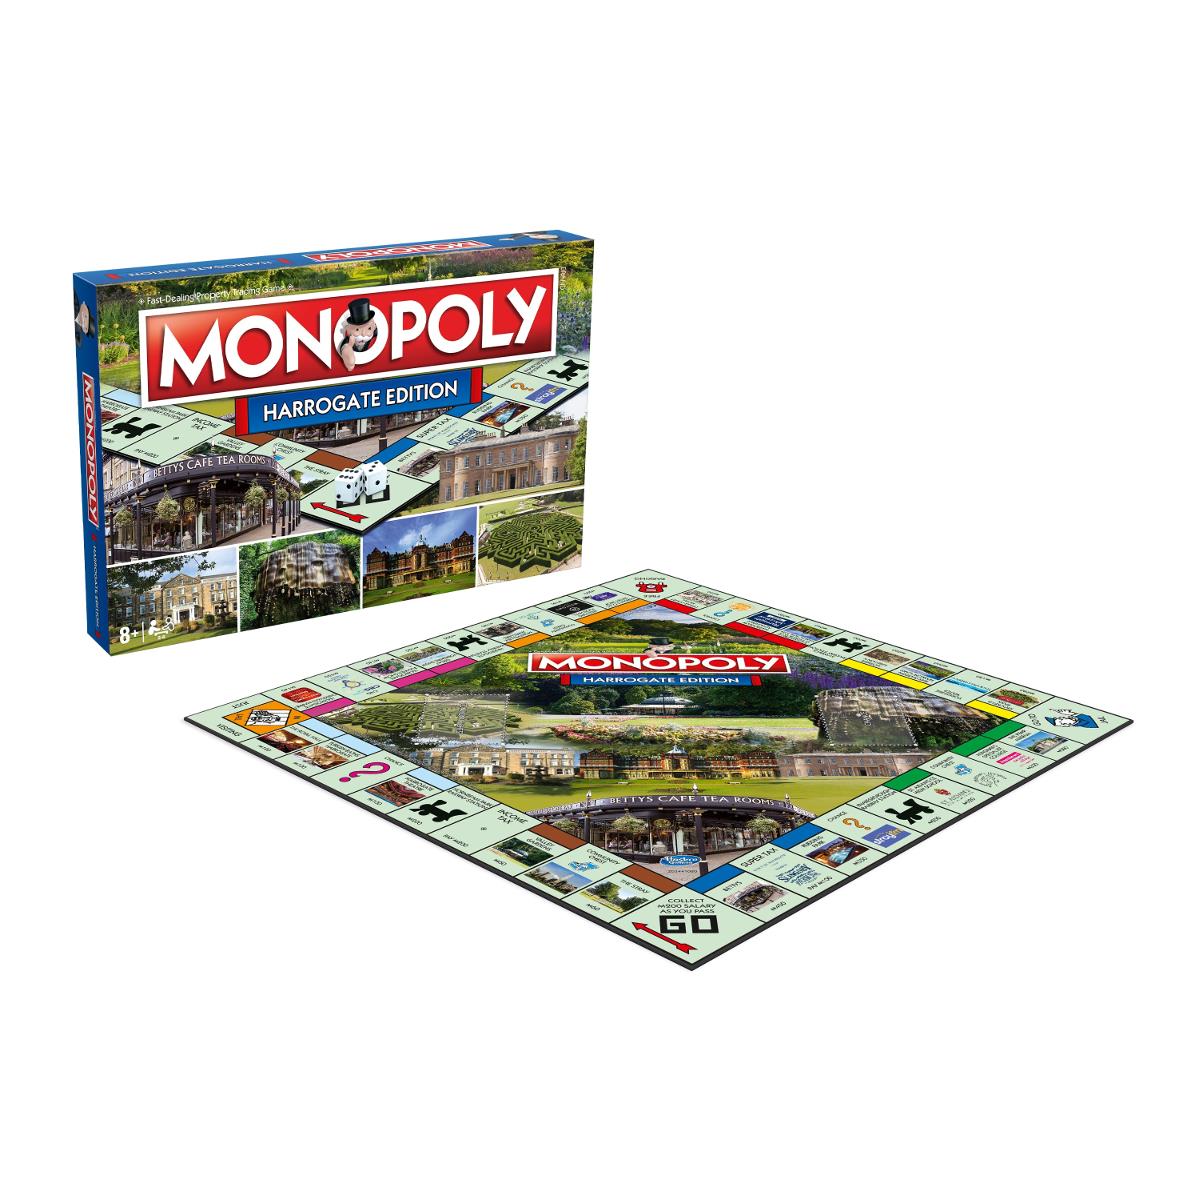 Monopoly Harrogate Edition Board Game - The Great Yorkshire Shop